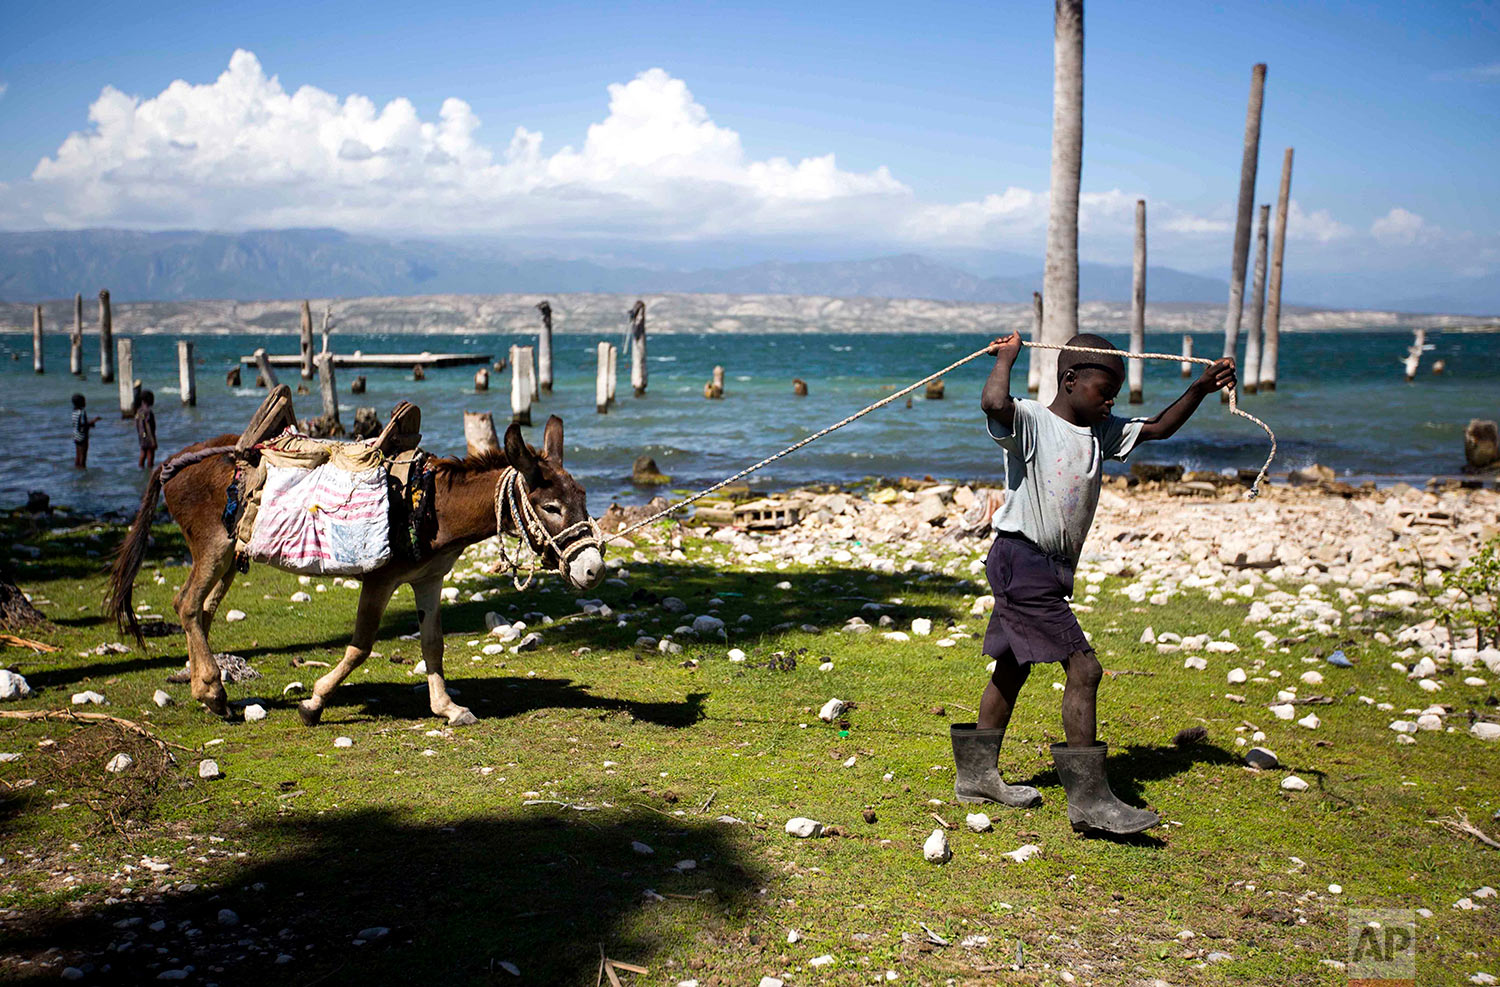  In this April 20, 2018 photo, a youth pulls a donkey carrying a one gallon bag of water he fetched from Lake Azuei in Fond Parisien, Haiti. Behind are homes that were flooded from rising water levels brought by heavy rain. (AP Photo/Dieu Nalio Chery